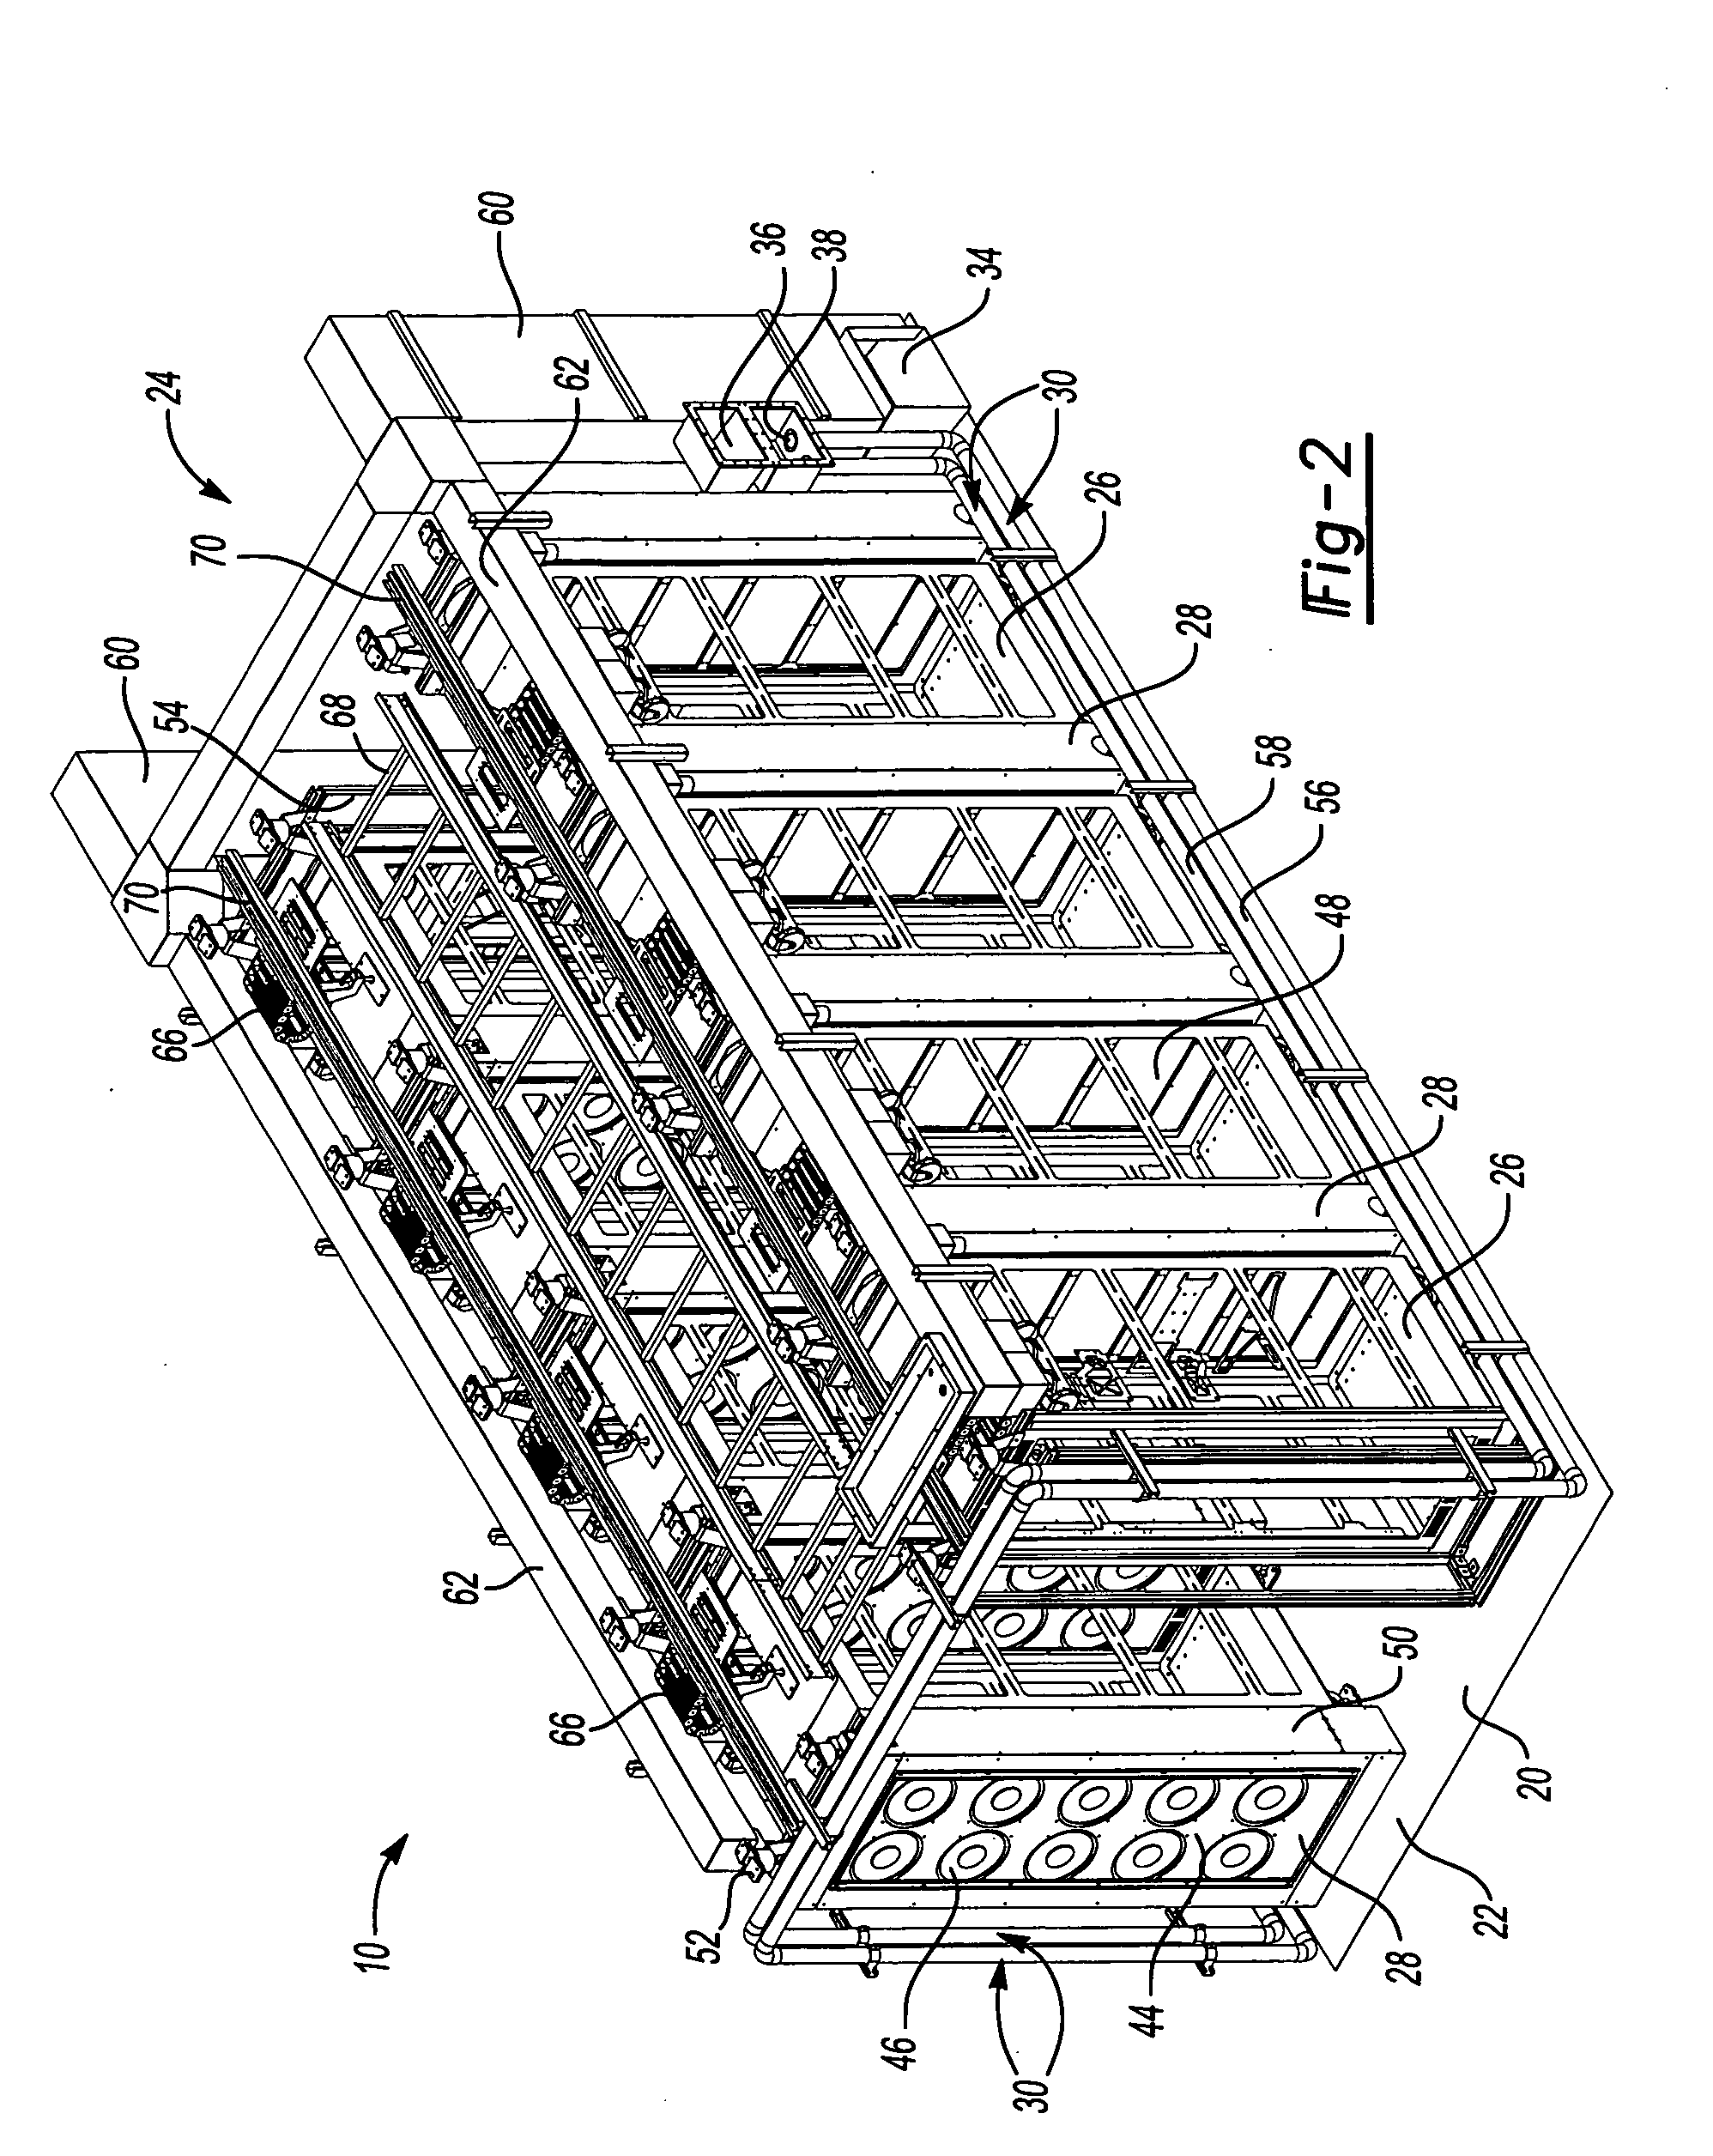 Cooling air flow loop for a data center in a shipping container